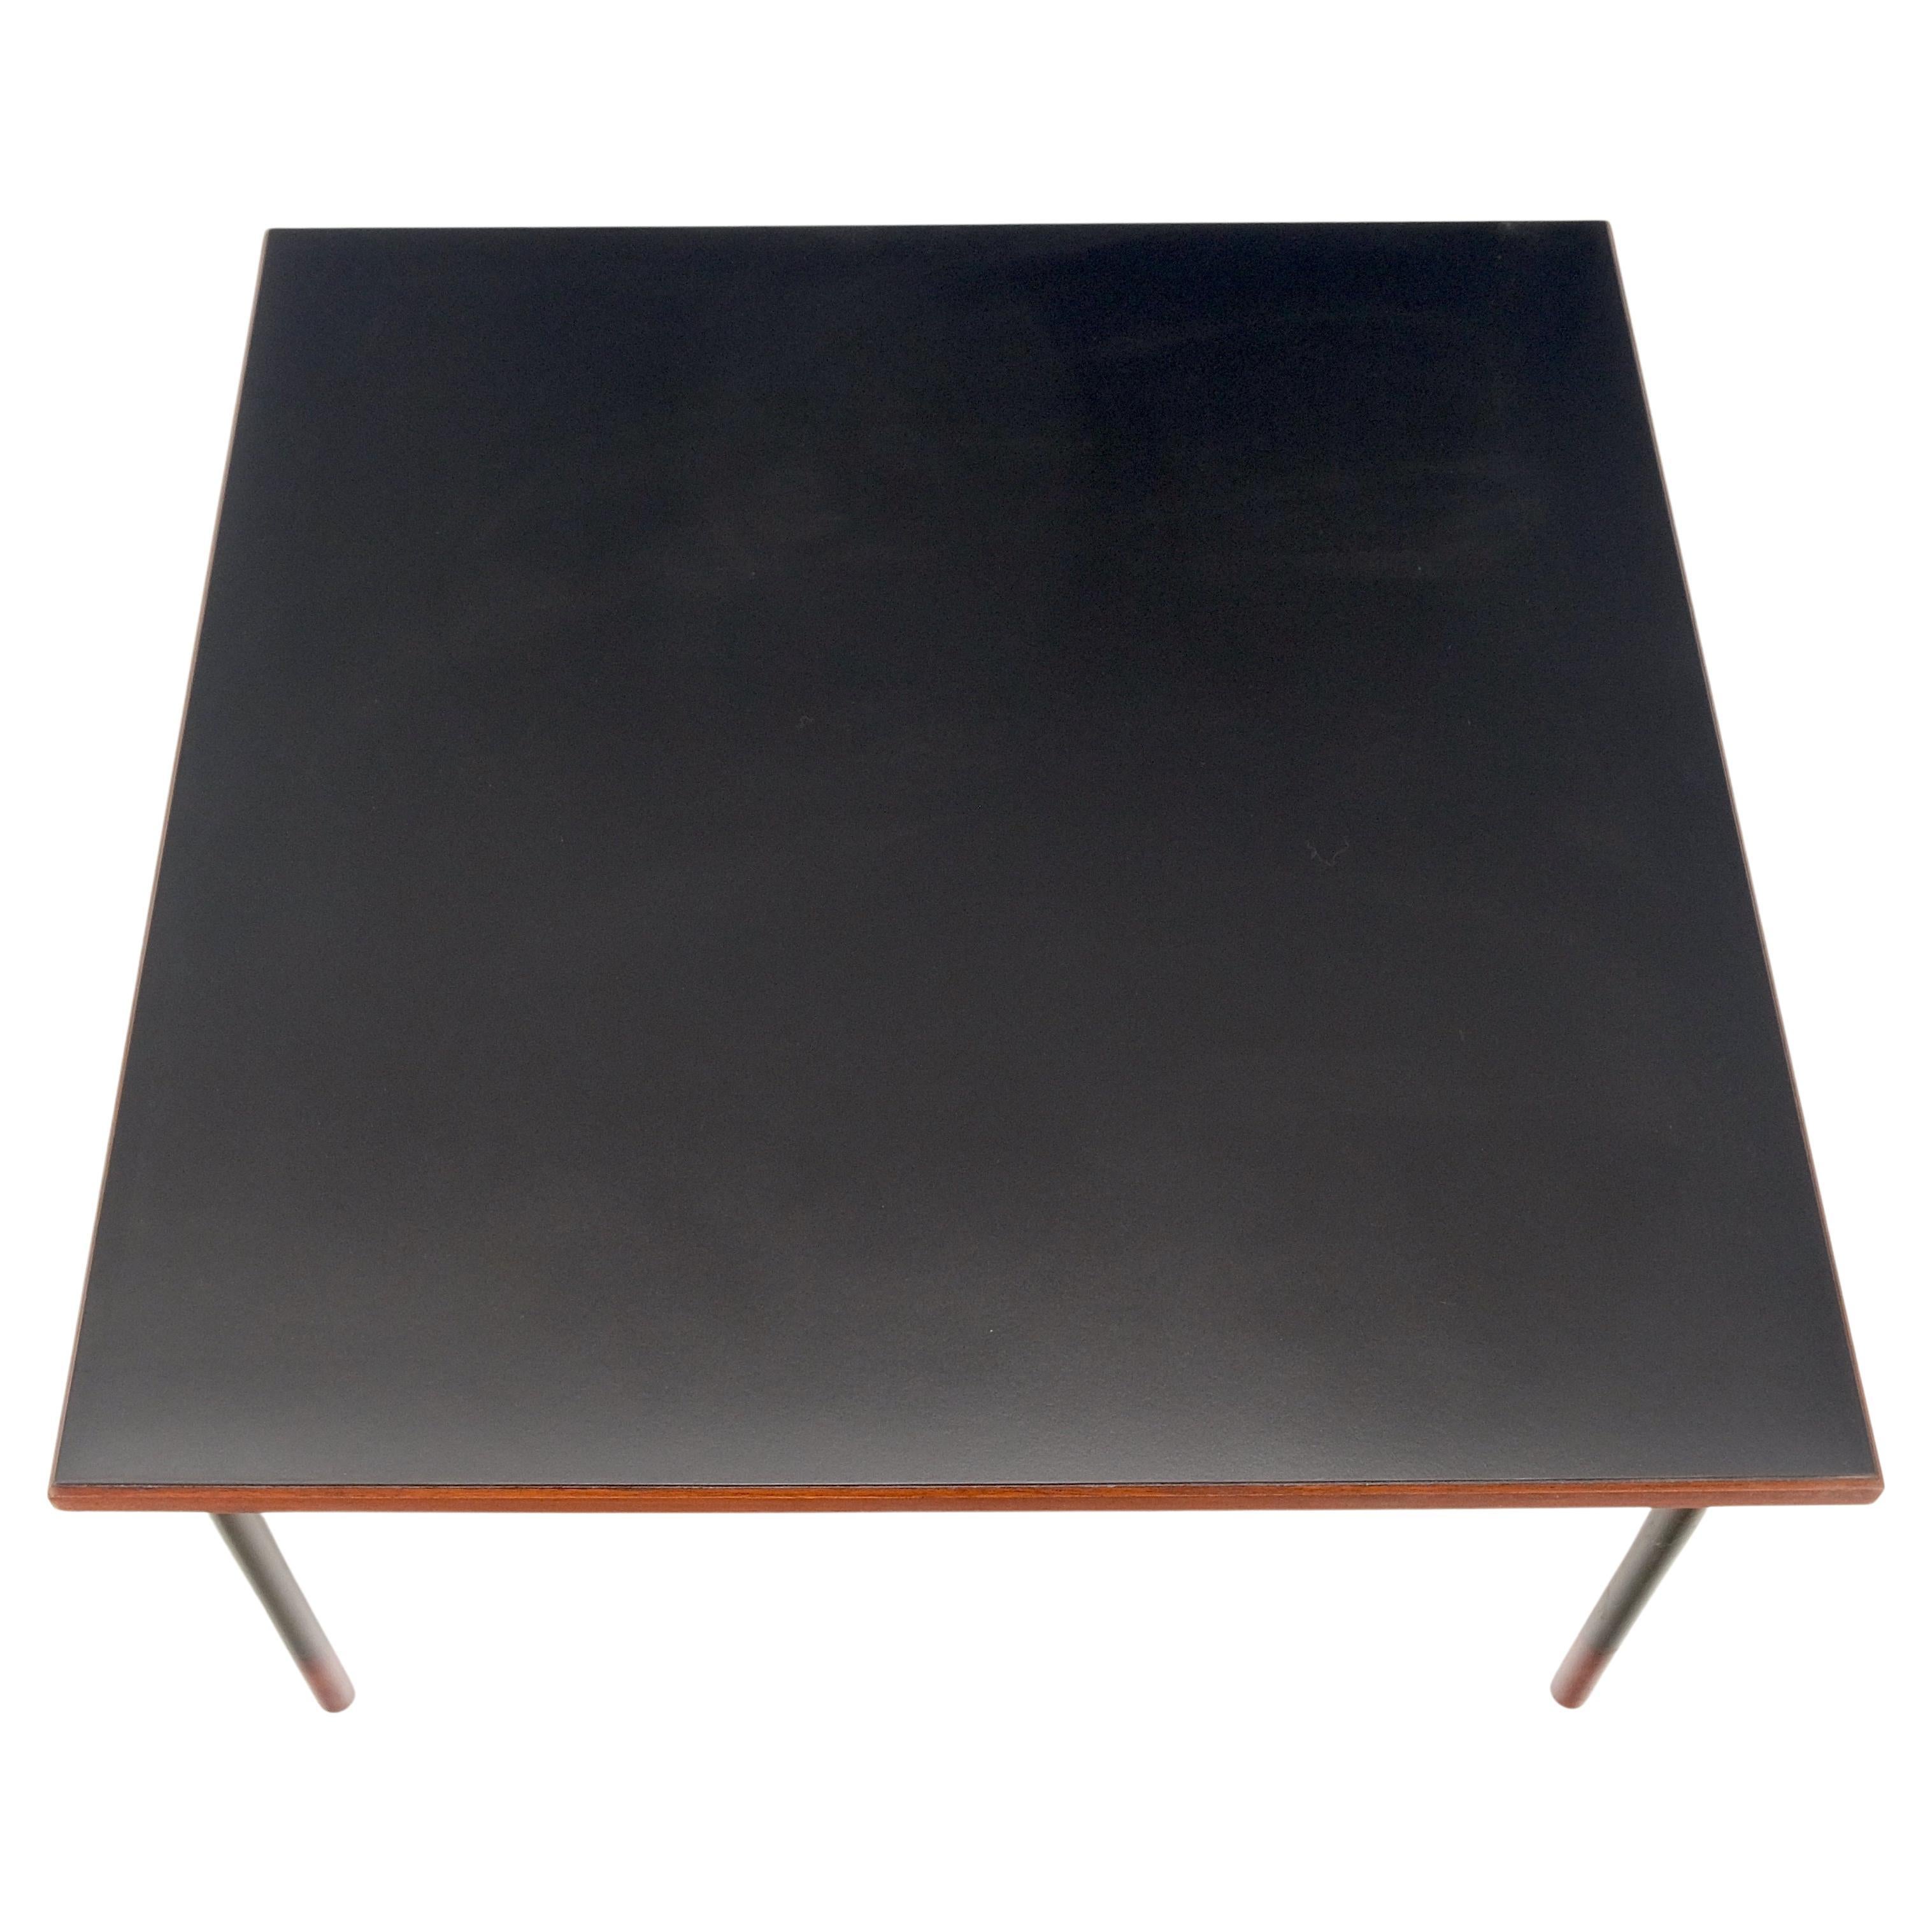 Lacquered Danish Mid-Century Modern Square Black Laminate and Teak Top Coffee Table MINT! For Sale